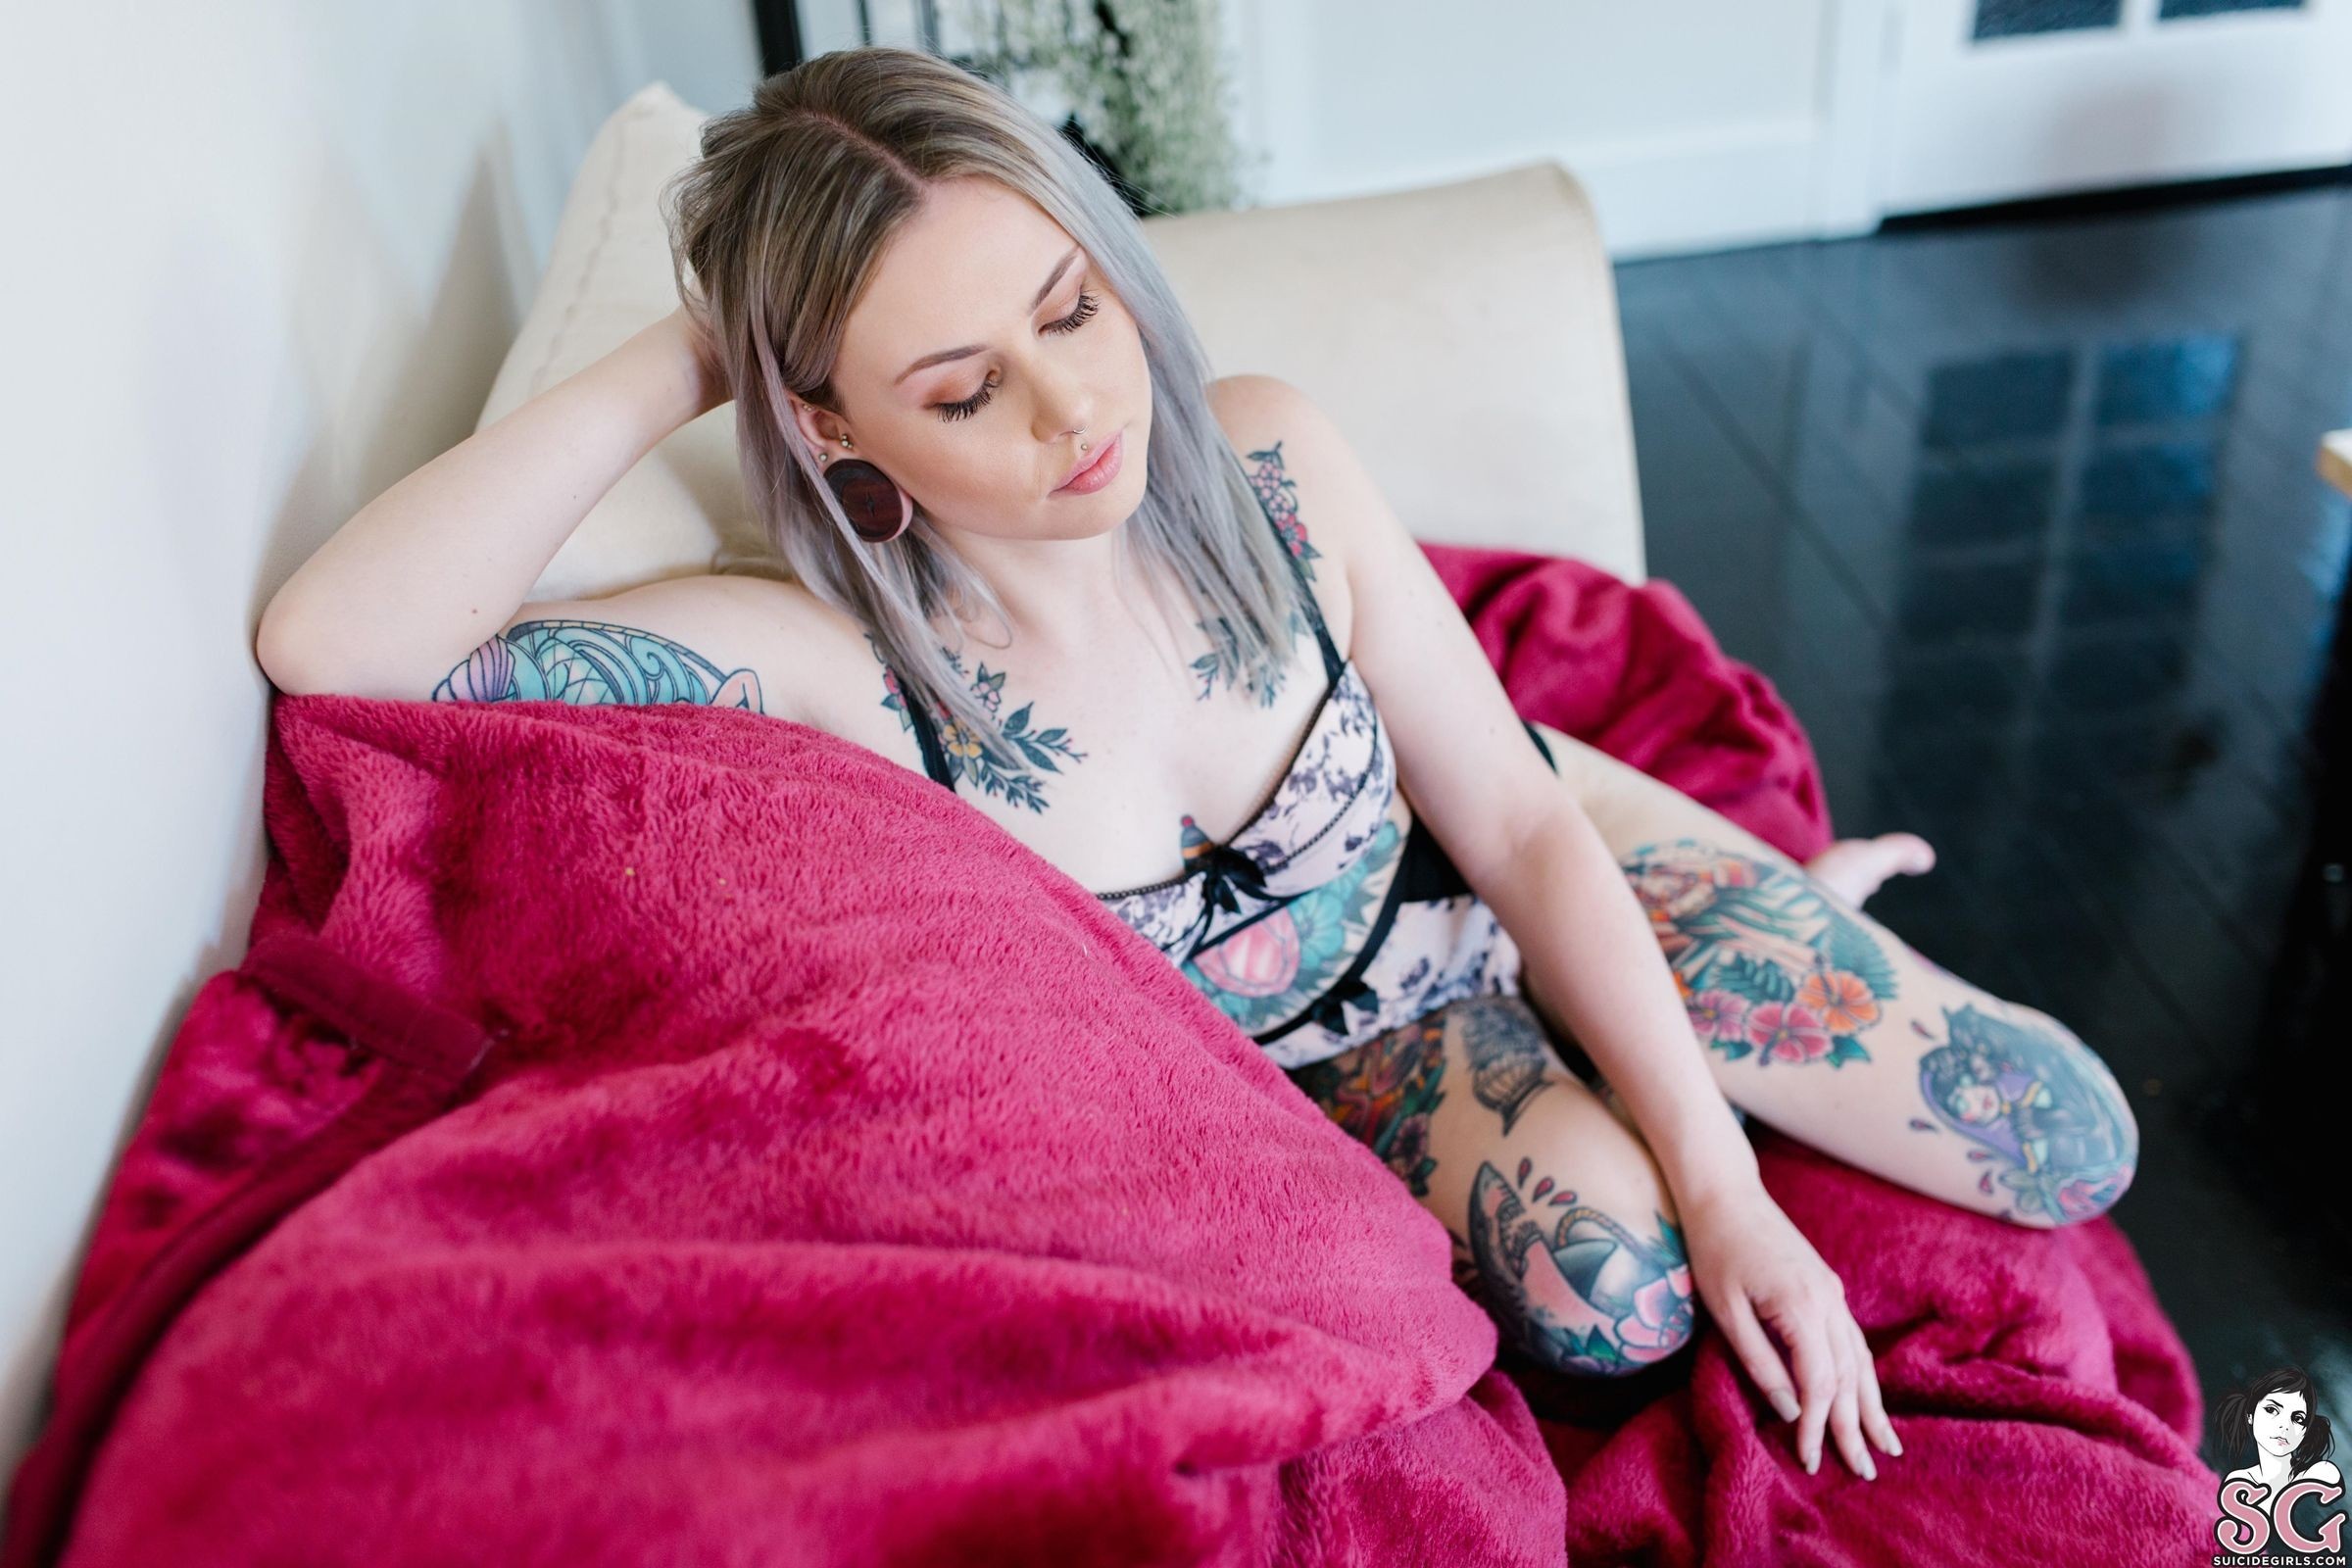 Chloee suicide